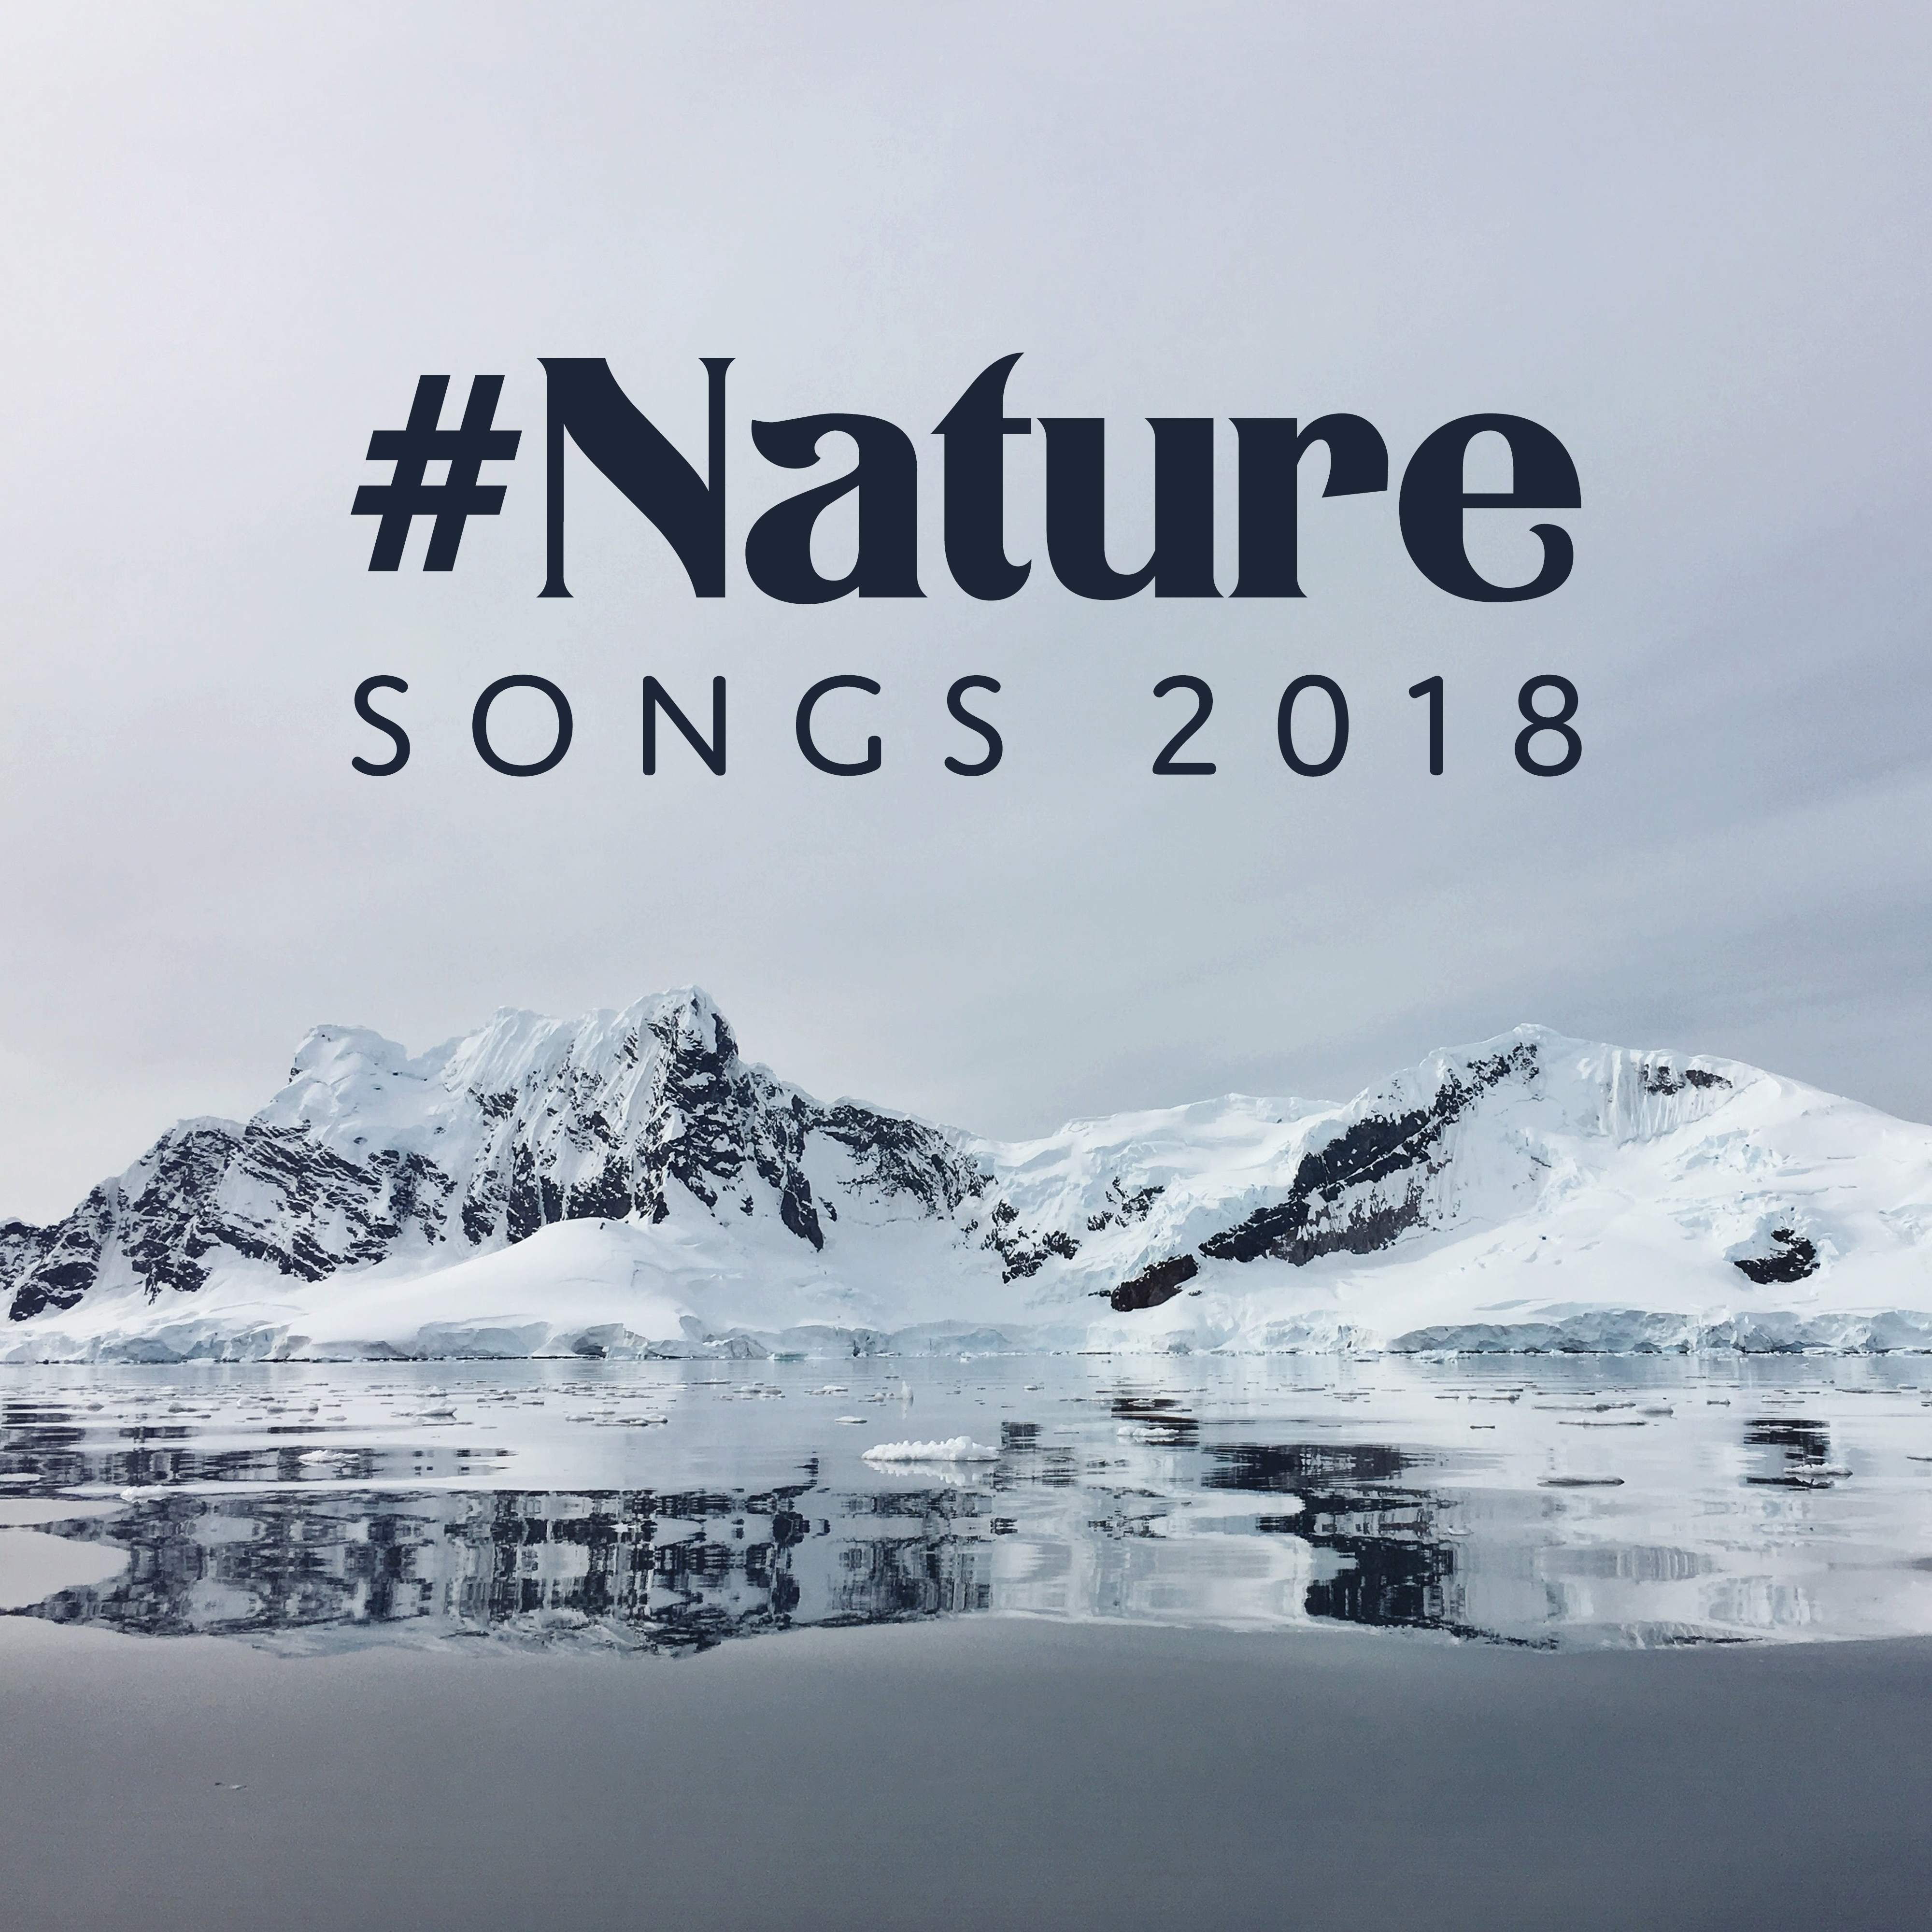 #Nature Songs 2018